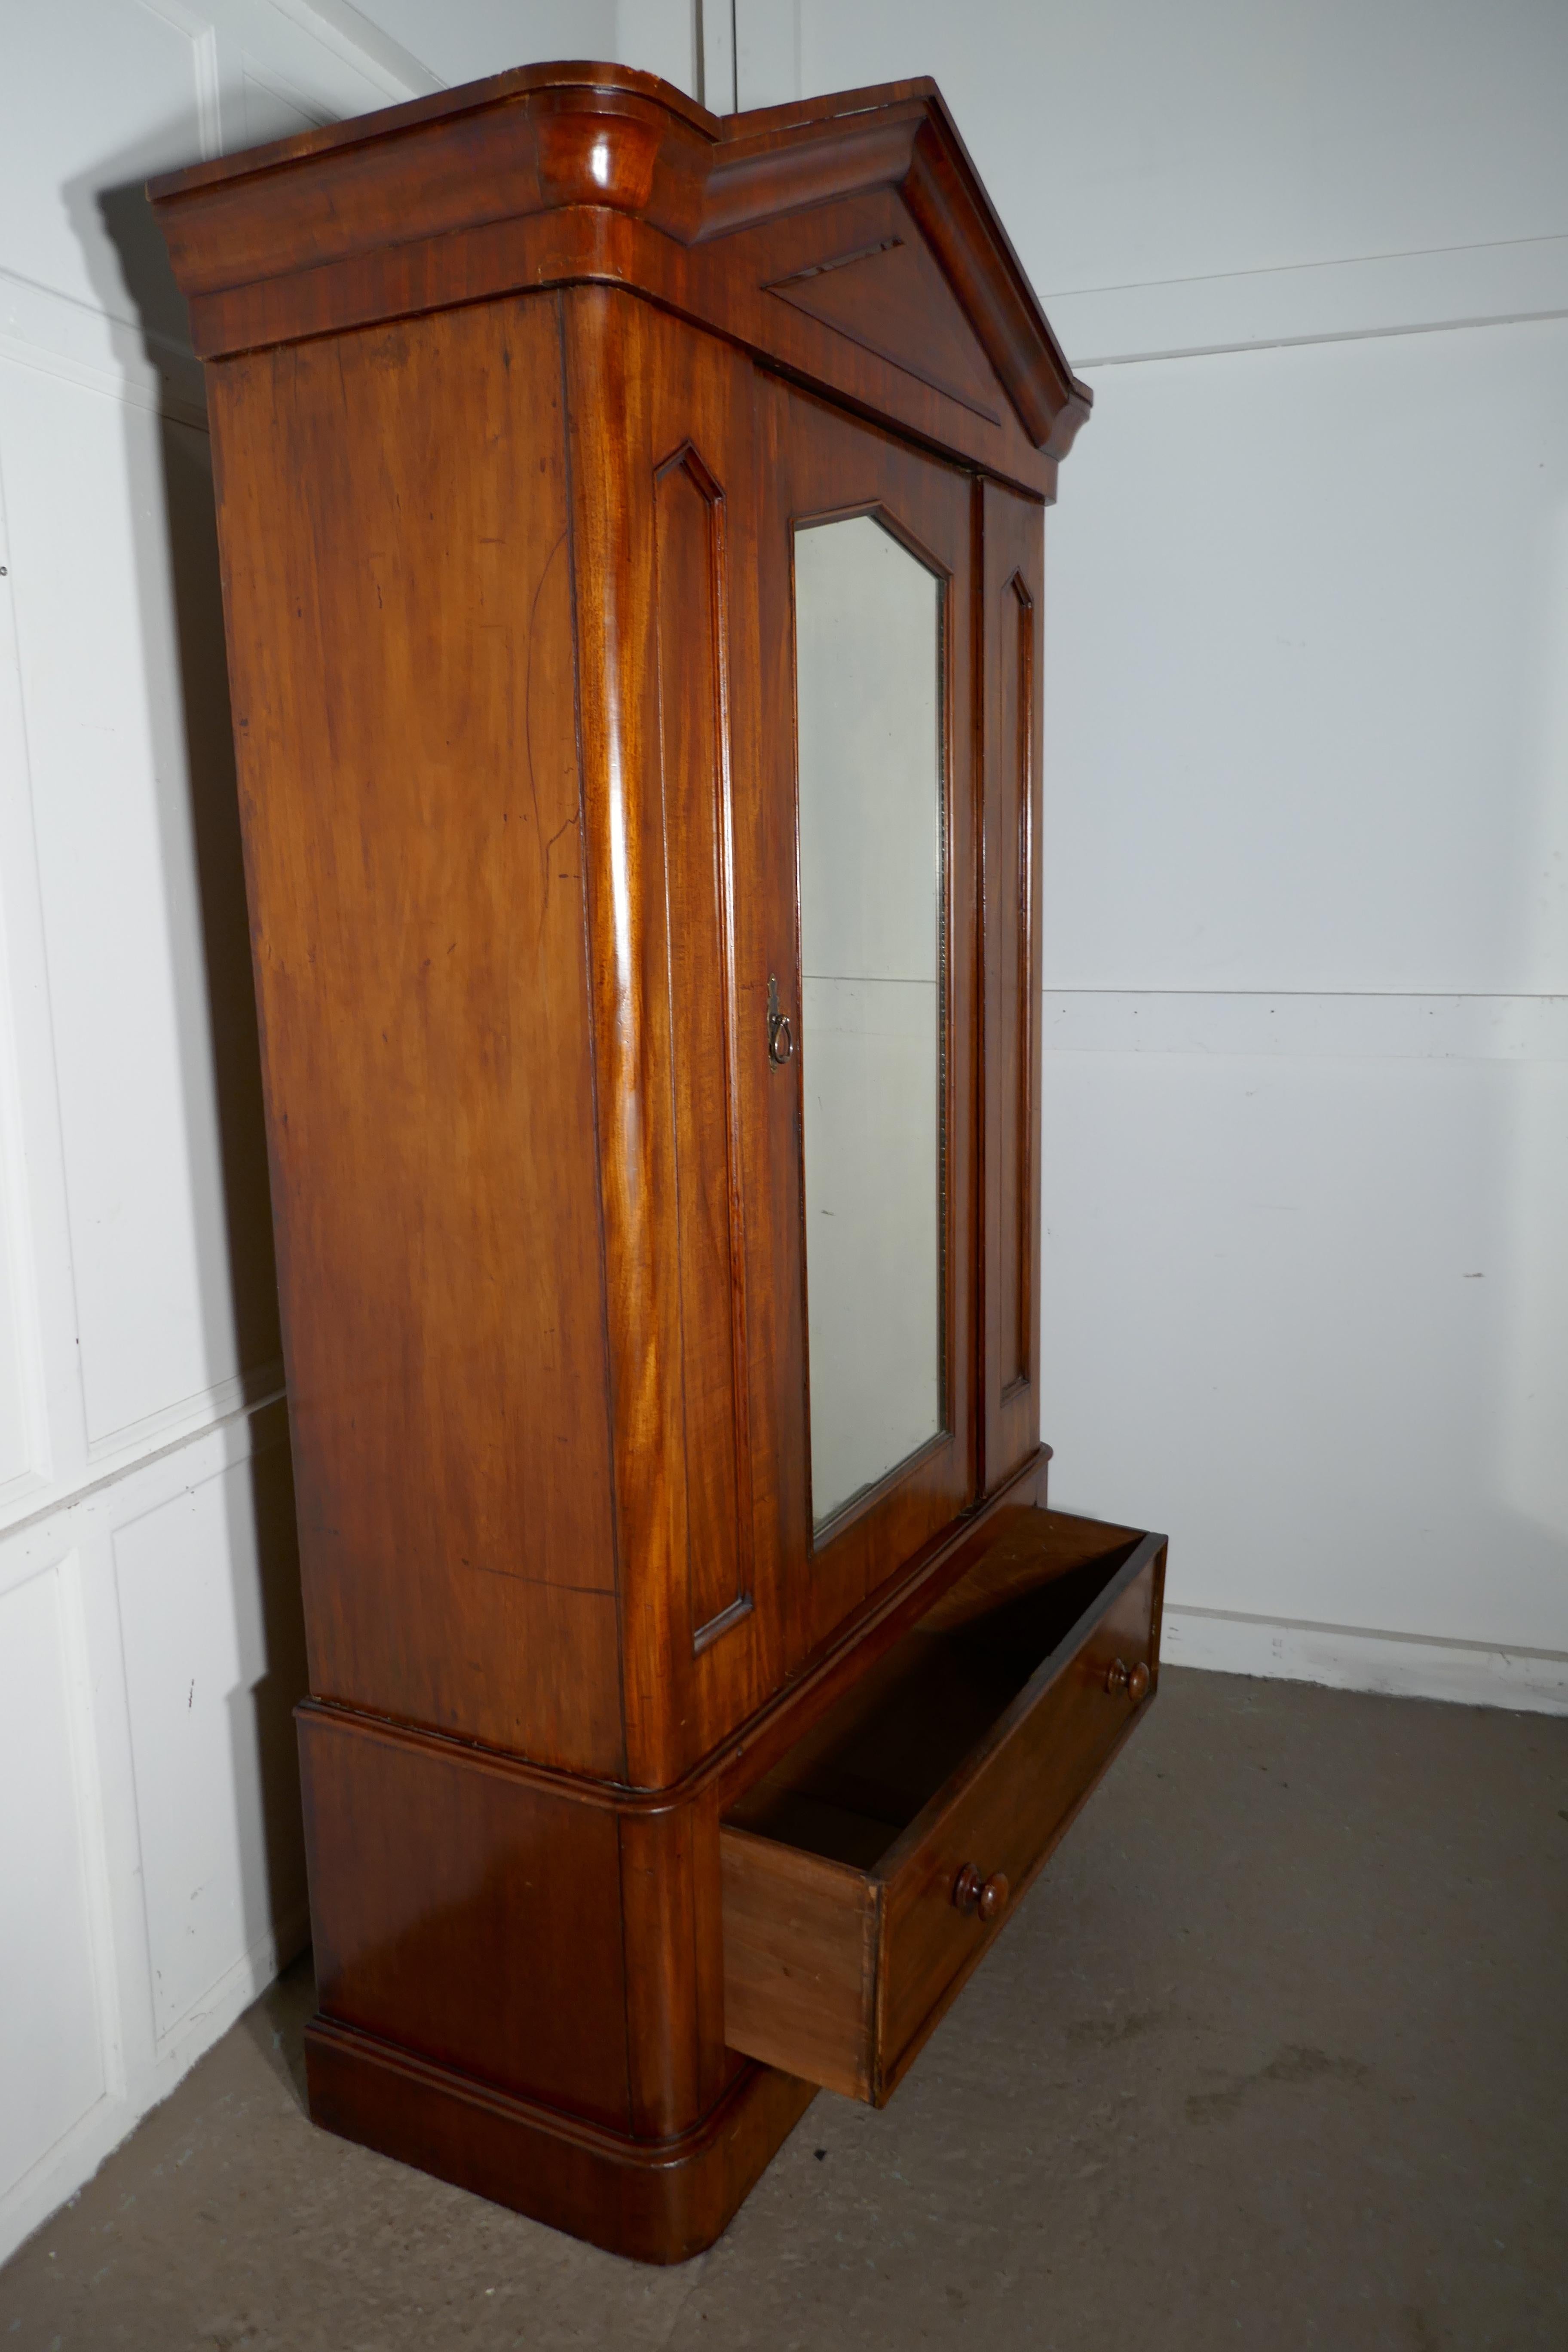 Victorian mahogany single wardrobe 

This is a very attractive piece, the mahogany wardrobe is a good quality piece, it has a mirrored door and a deep pointed pediment

The Interior has a new hanging rail, and there is a deep drawer at the